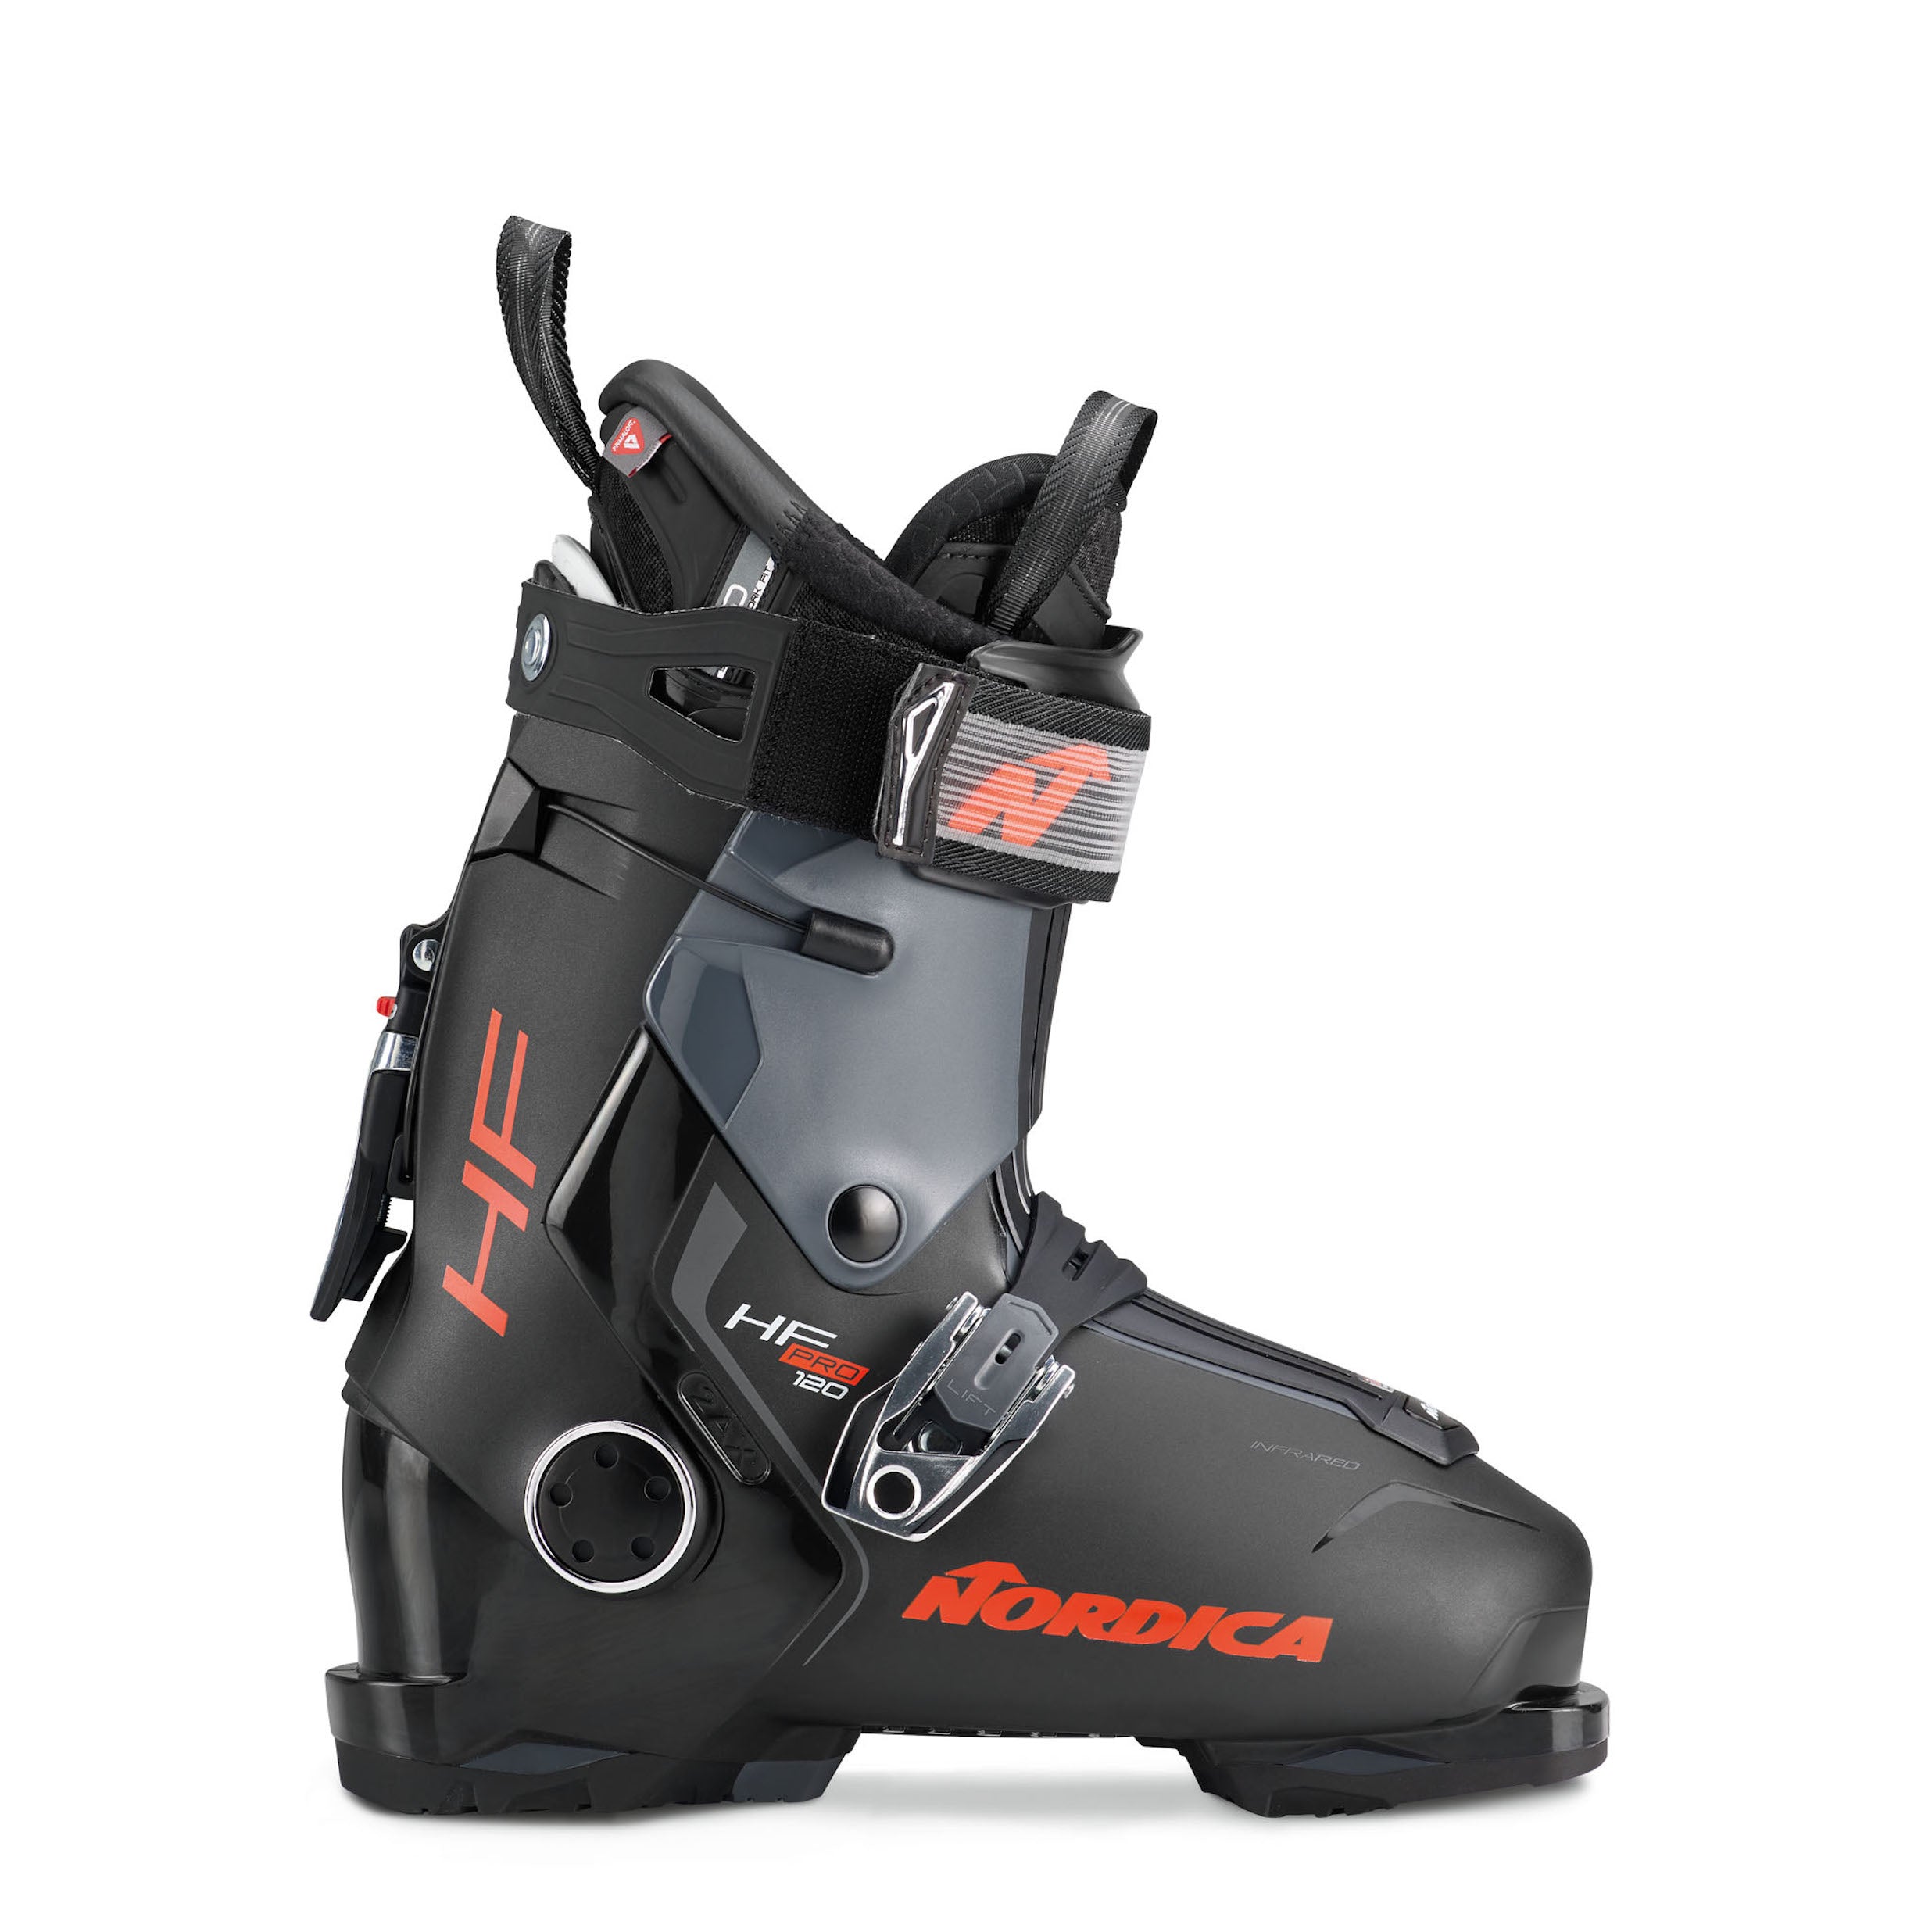 Men's Nordica HF Pro 120 ski boot, black and grey with red accents. 2 buckles.